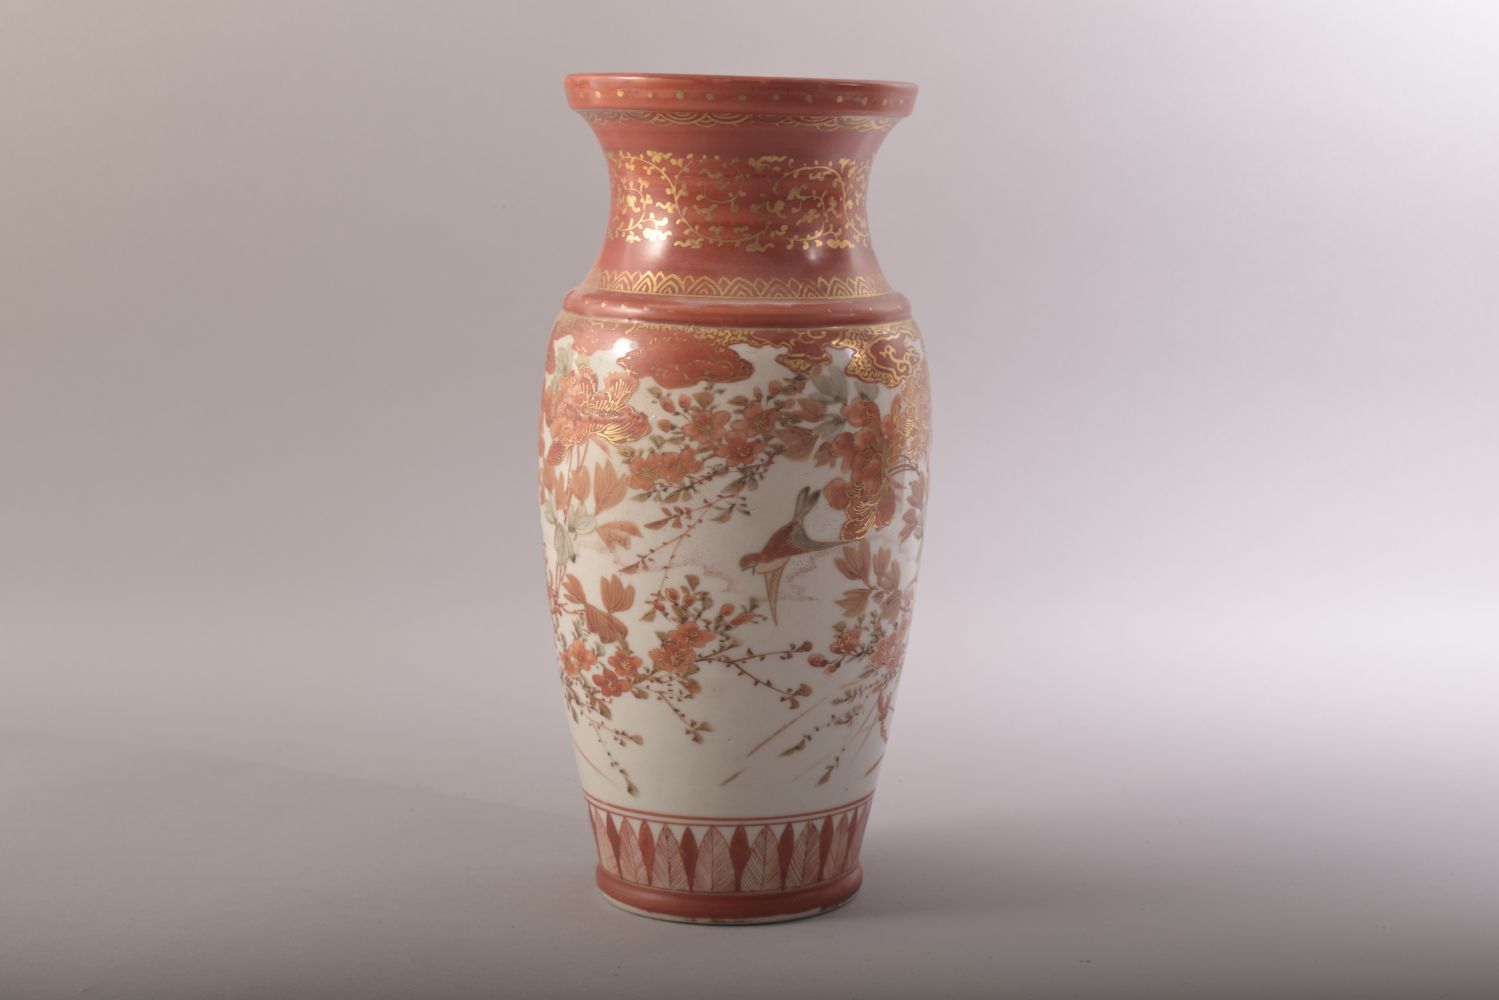 A JAPANESE KUTANI PORCELAIN VASE, painted with birds, native flora and gilt highlights, 30.5cm - Image 3 of 7